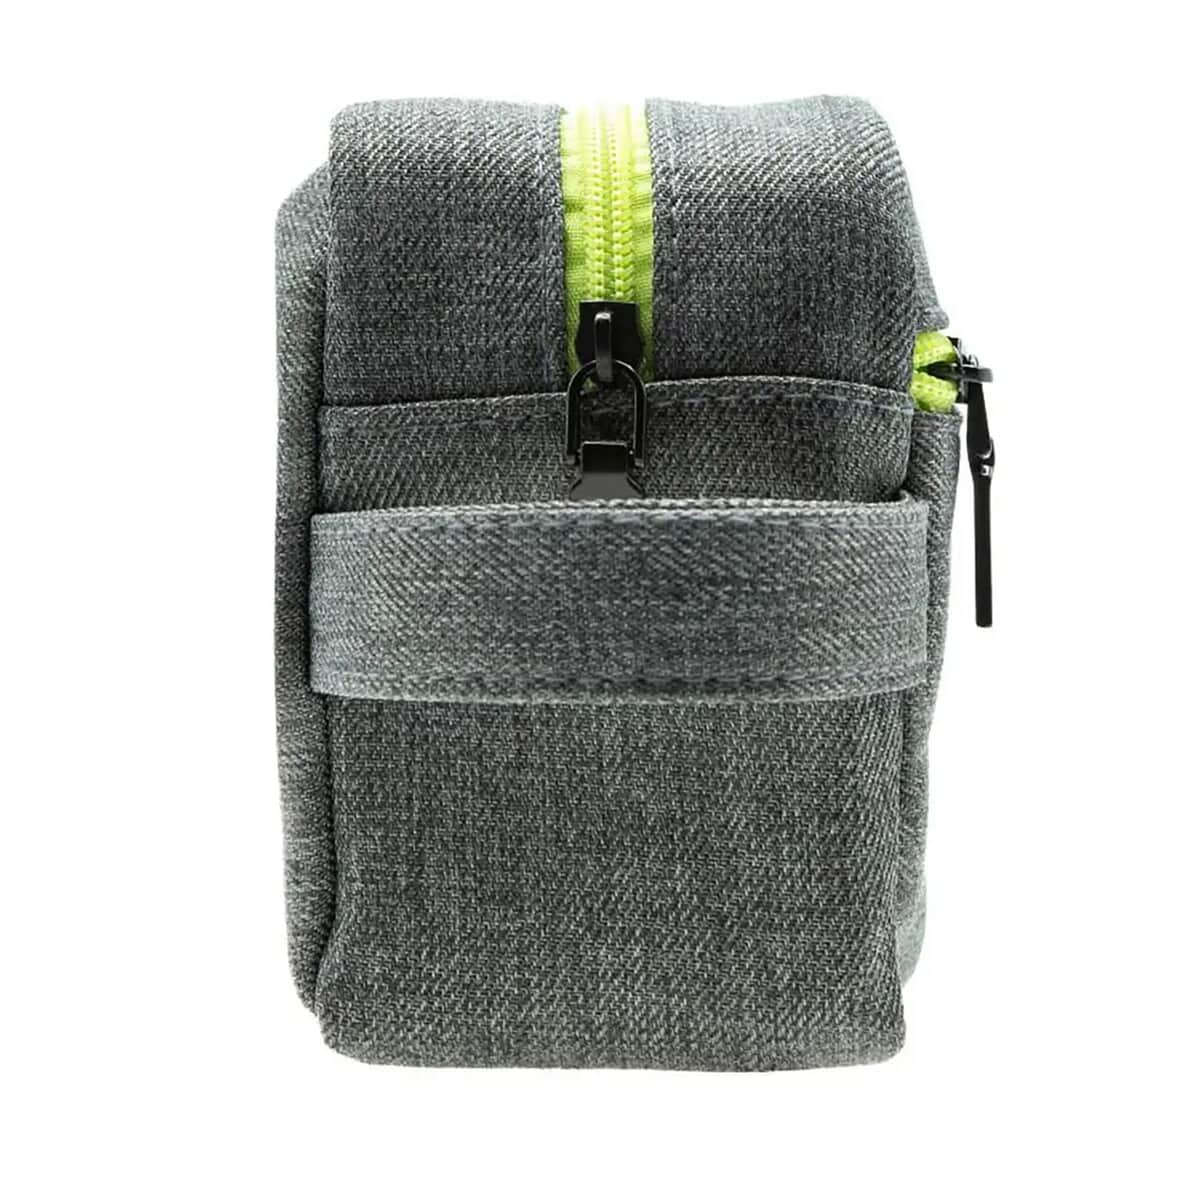 Gray Canvas Textured Dopp Kit With Lime Green Zipper (8.1"x5.35"x2.8") image number 4